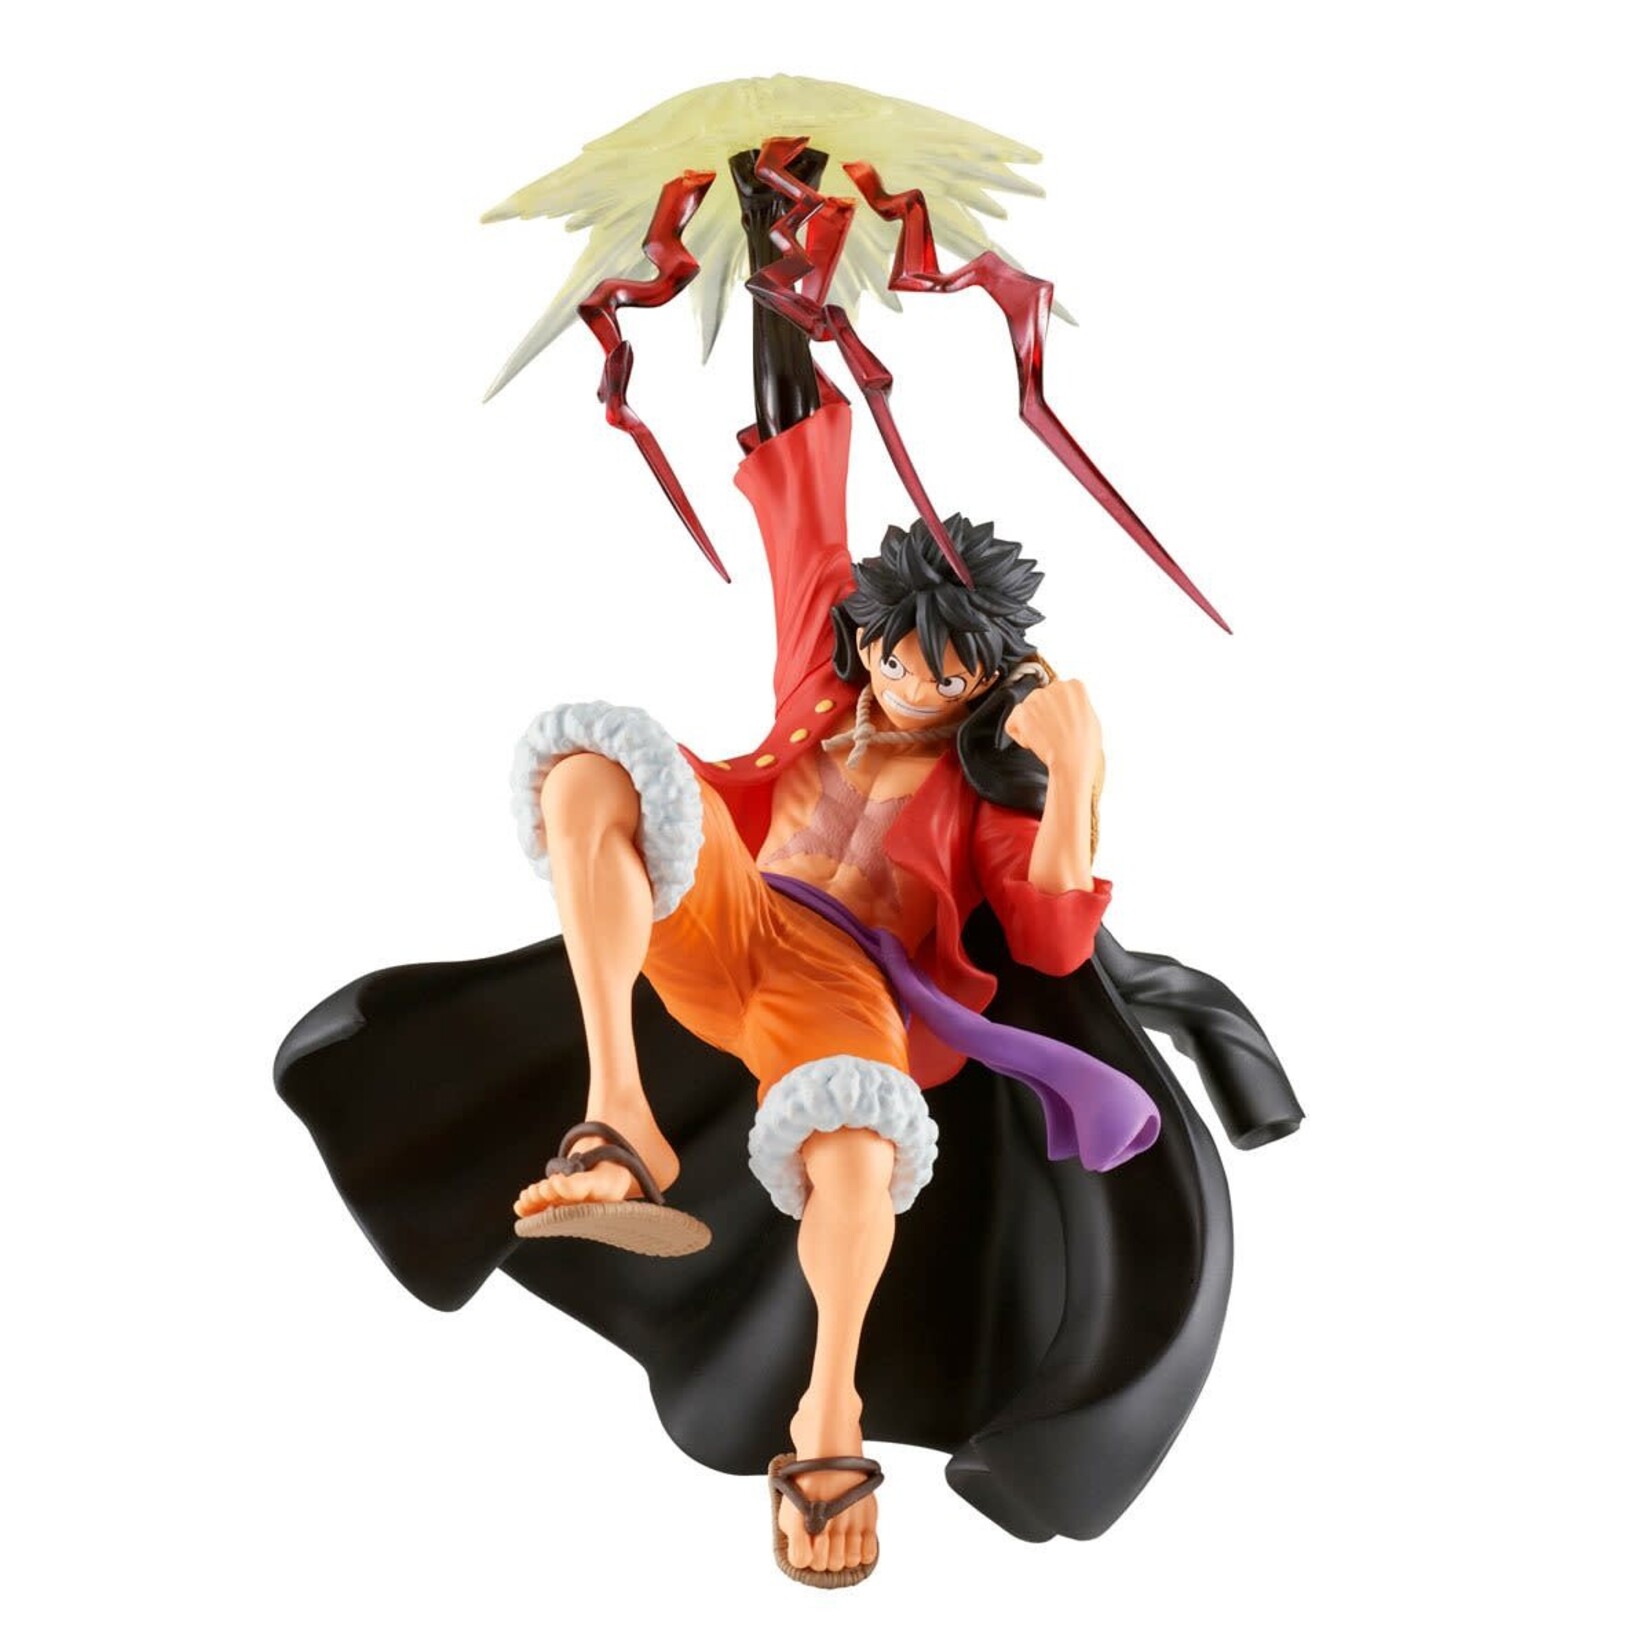 FIGURE-One Piece (Monkey D. Luffy II Battle Record Collection)